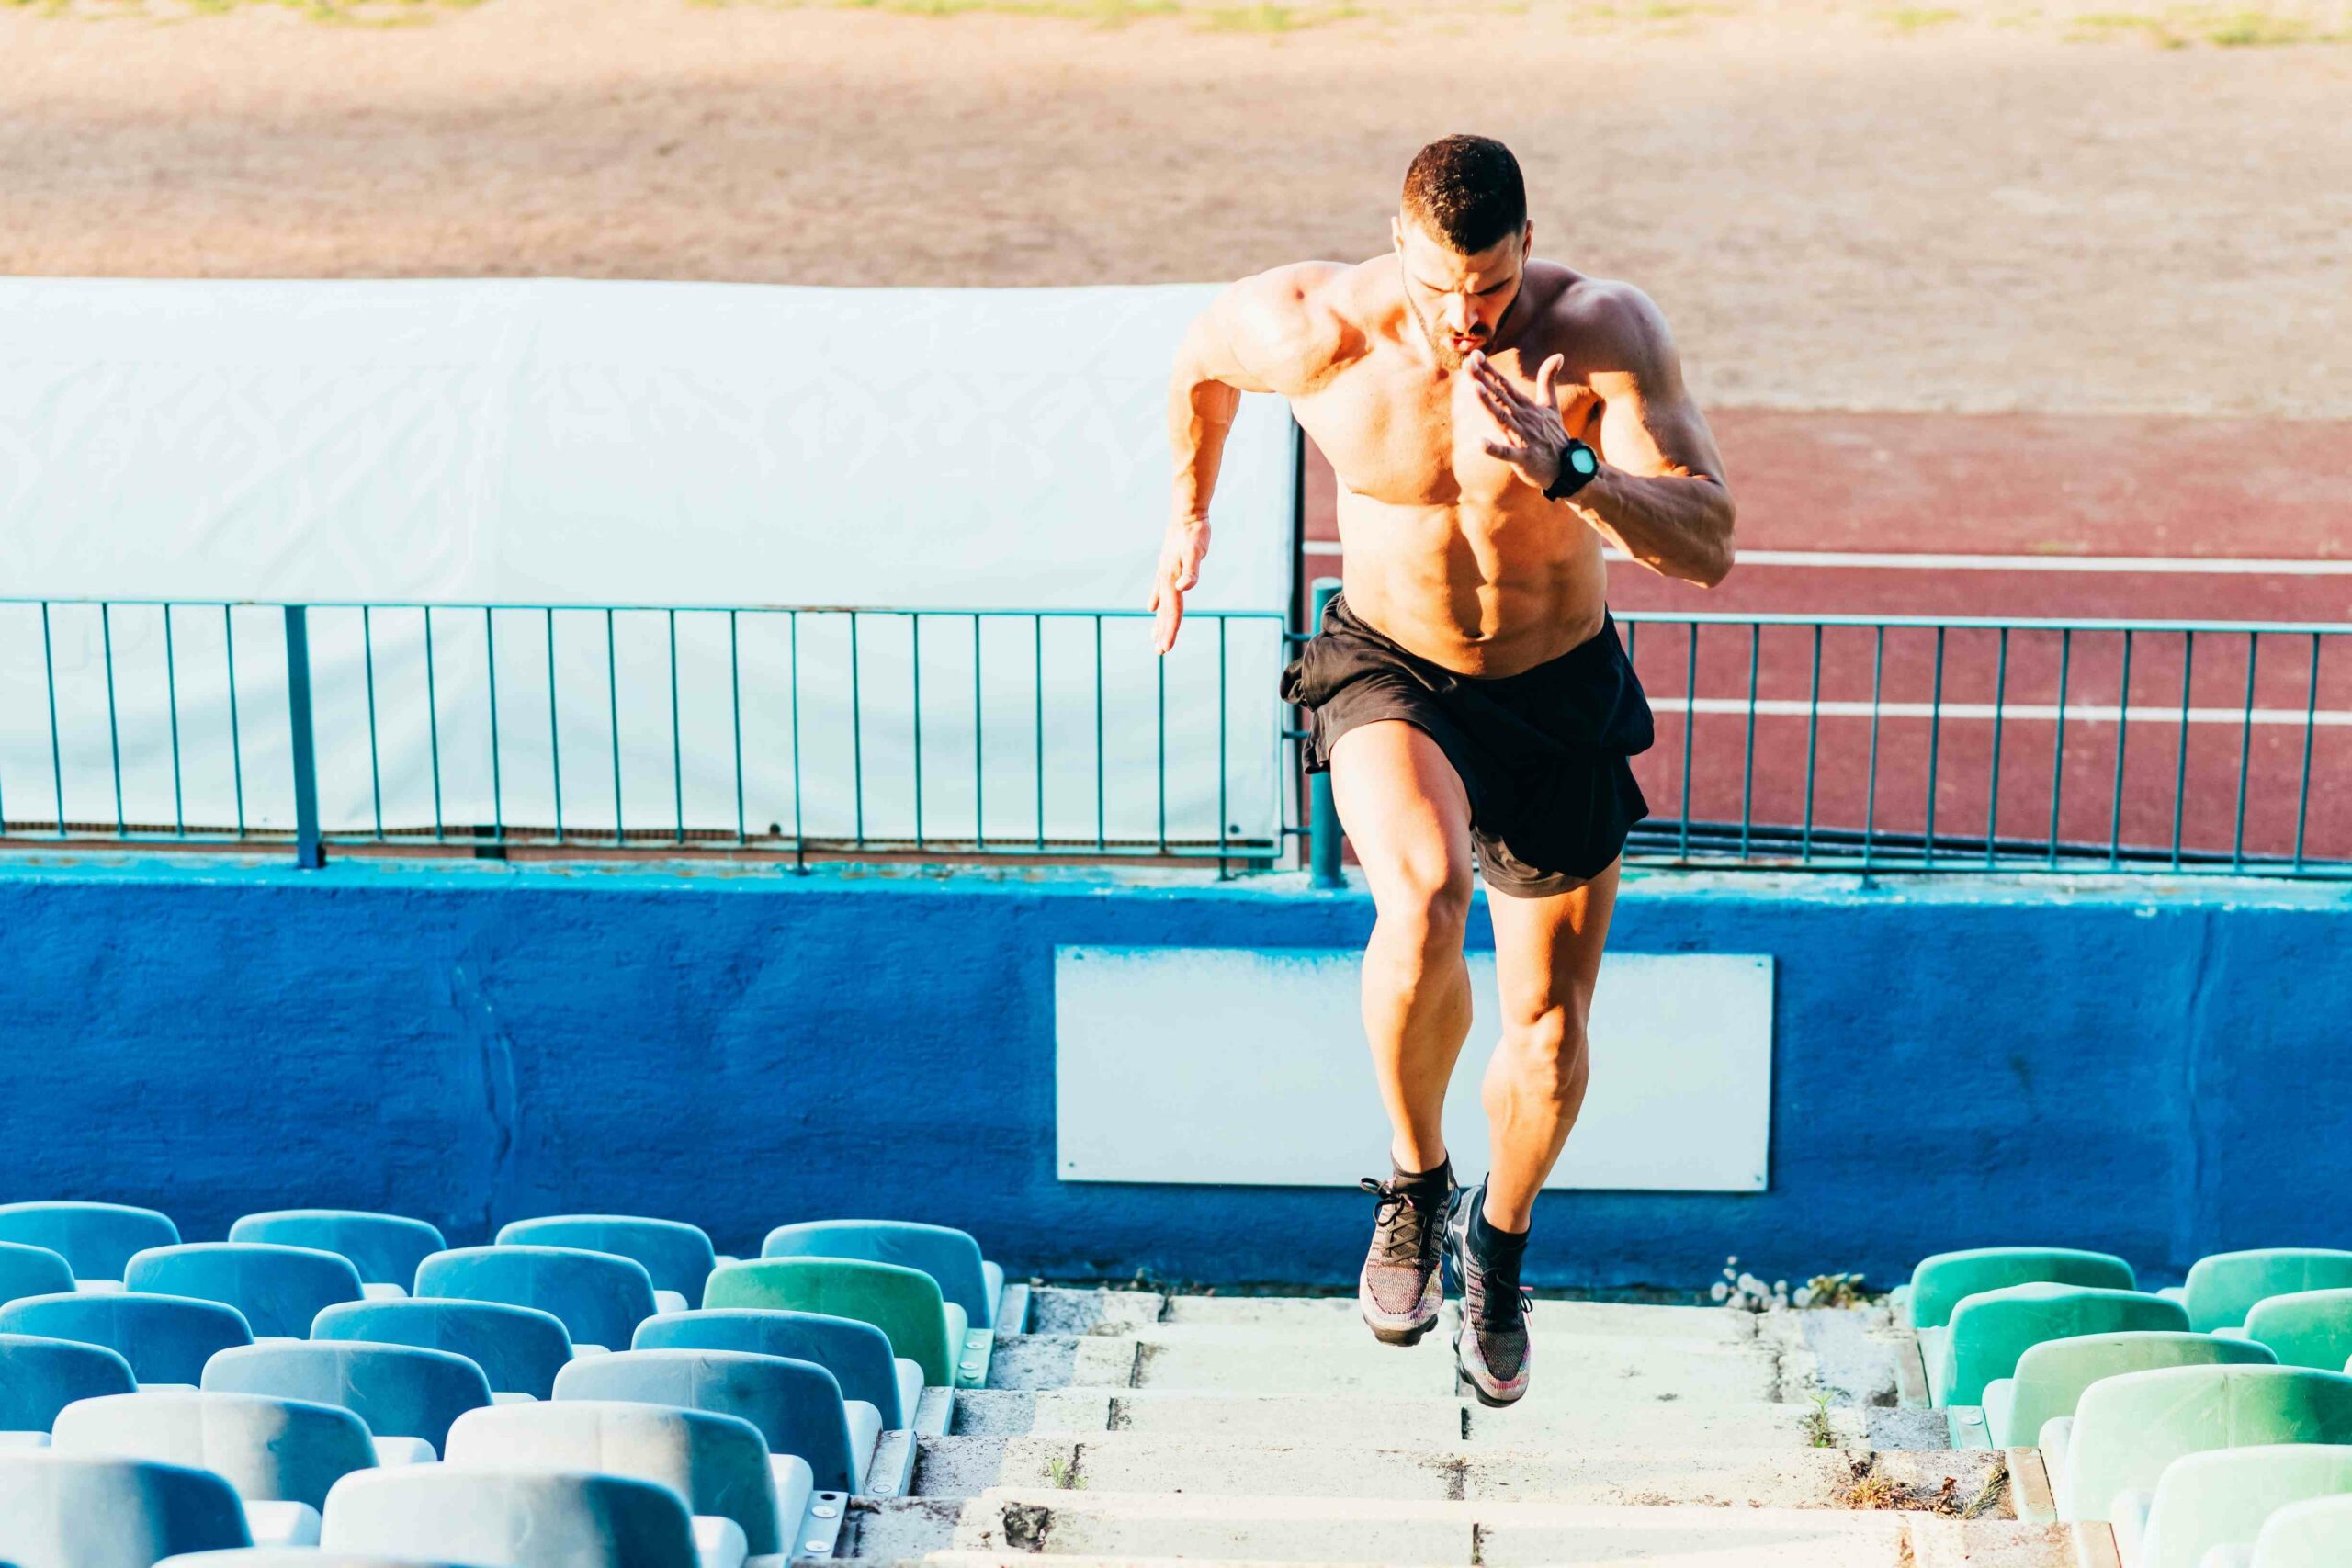 How stair running improves your performance